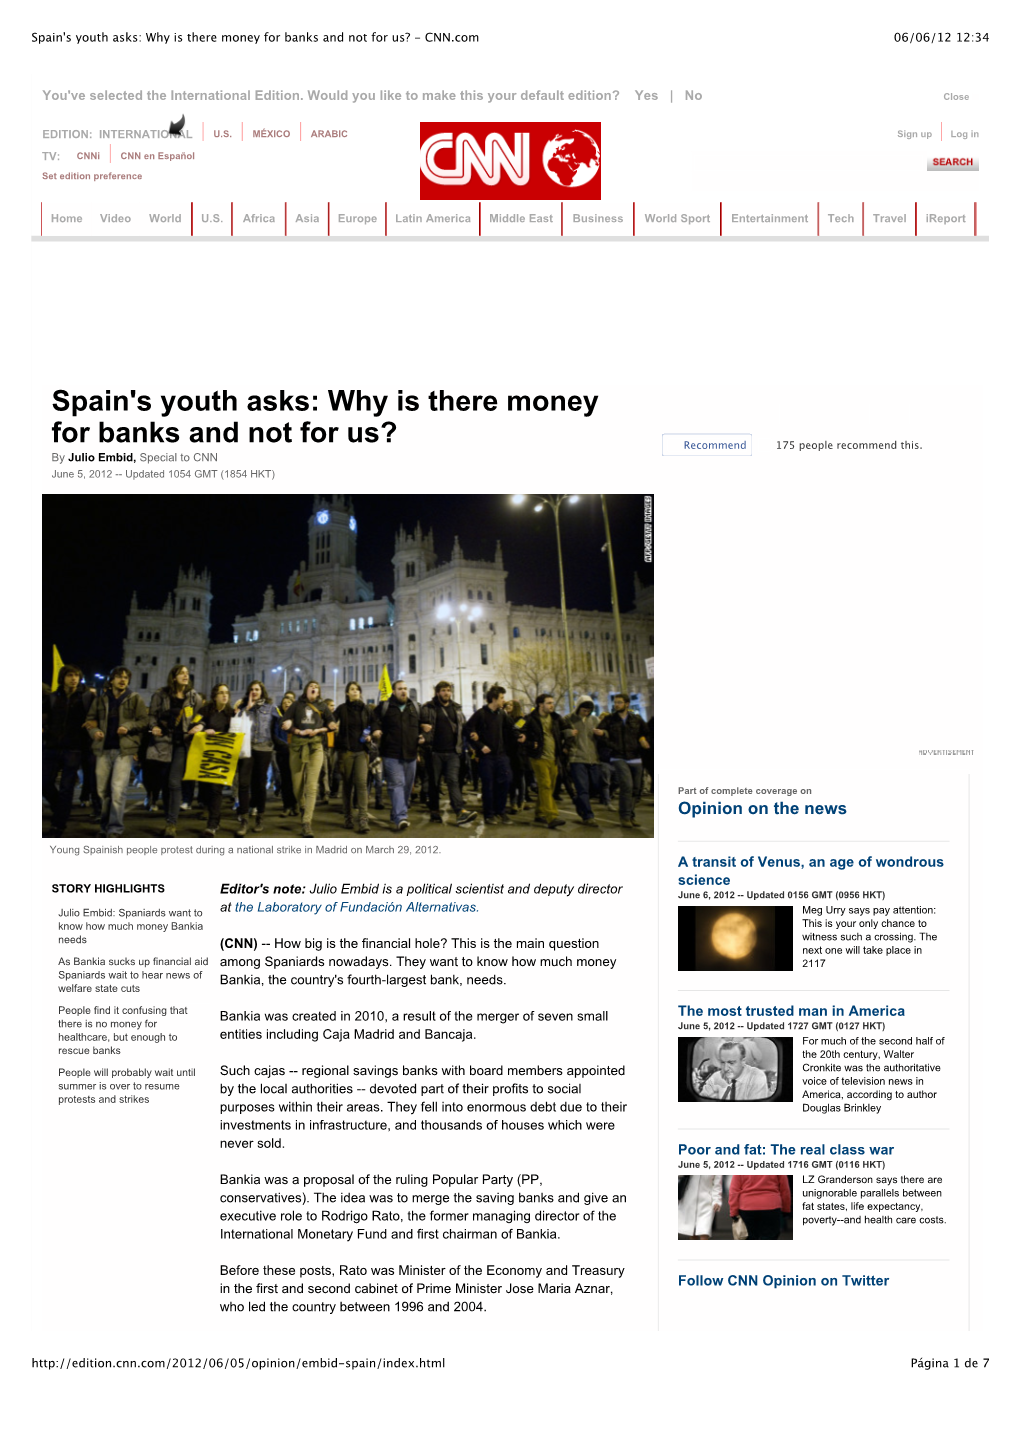 Spain's Youth Asks: Why Is There Money for Banks and Not for Us? - CNN.Com 06/06/12 12:34